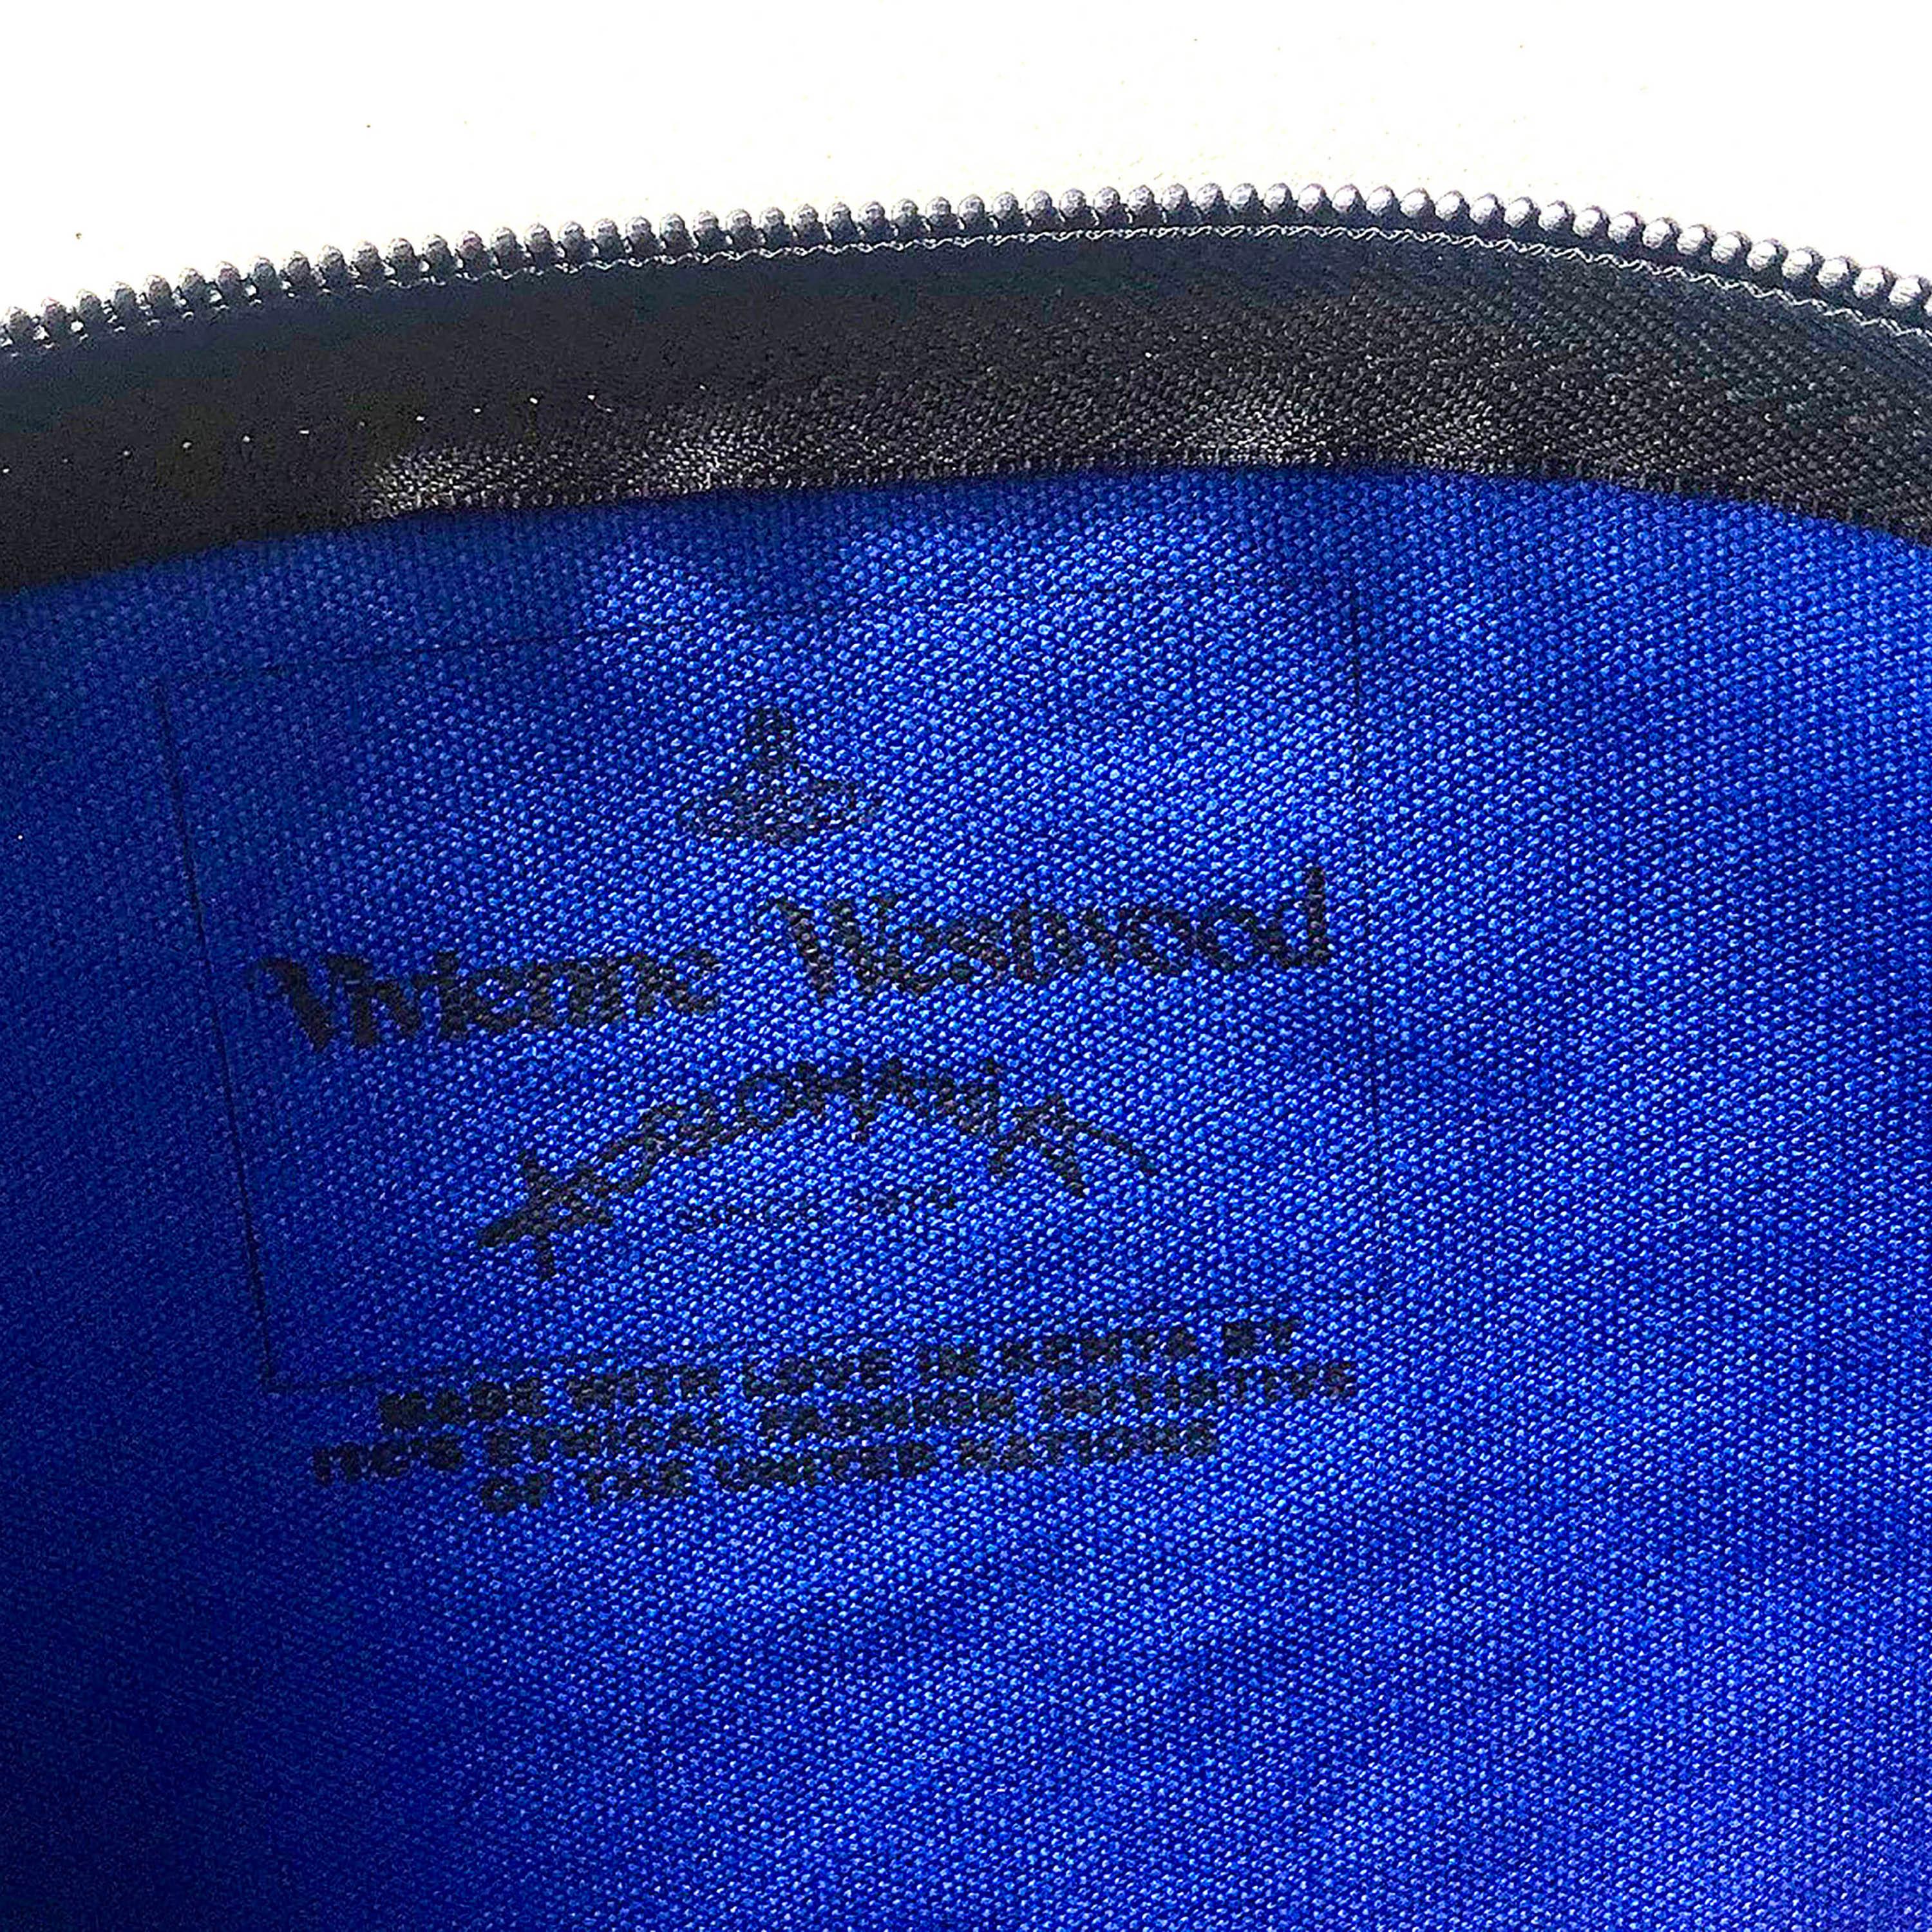 Vivienne Westwood - Smiley Zip Pouch / Bag - Embroidered Detailing - NEW For Sale 3